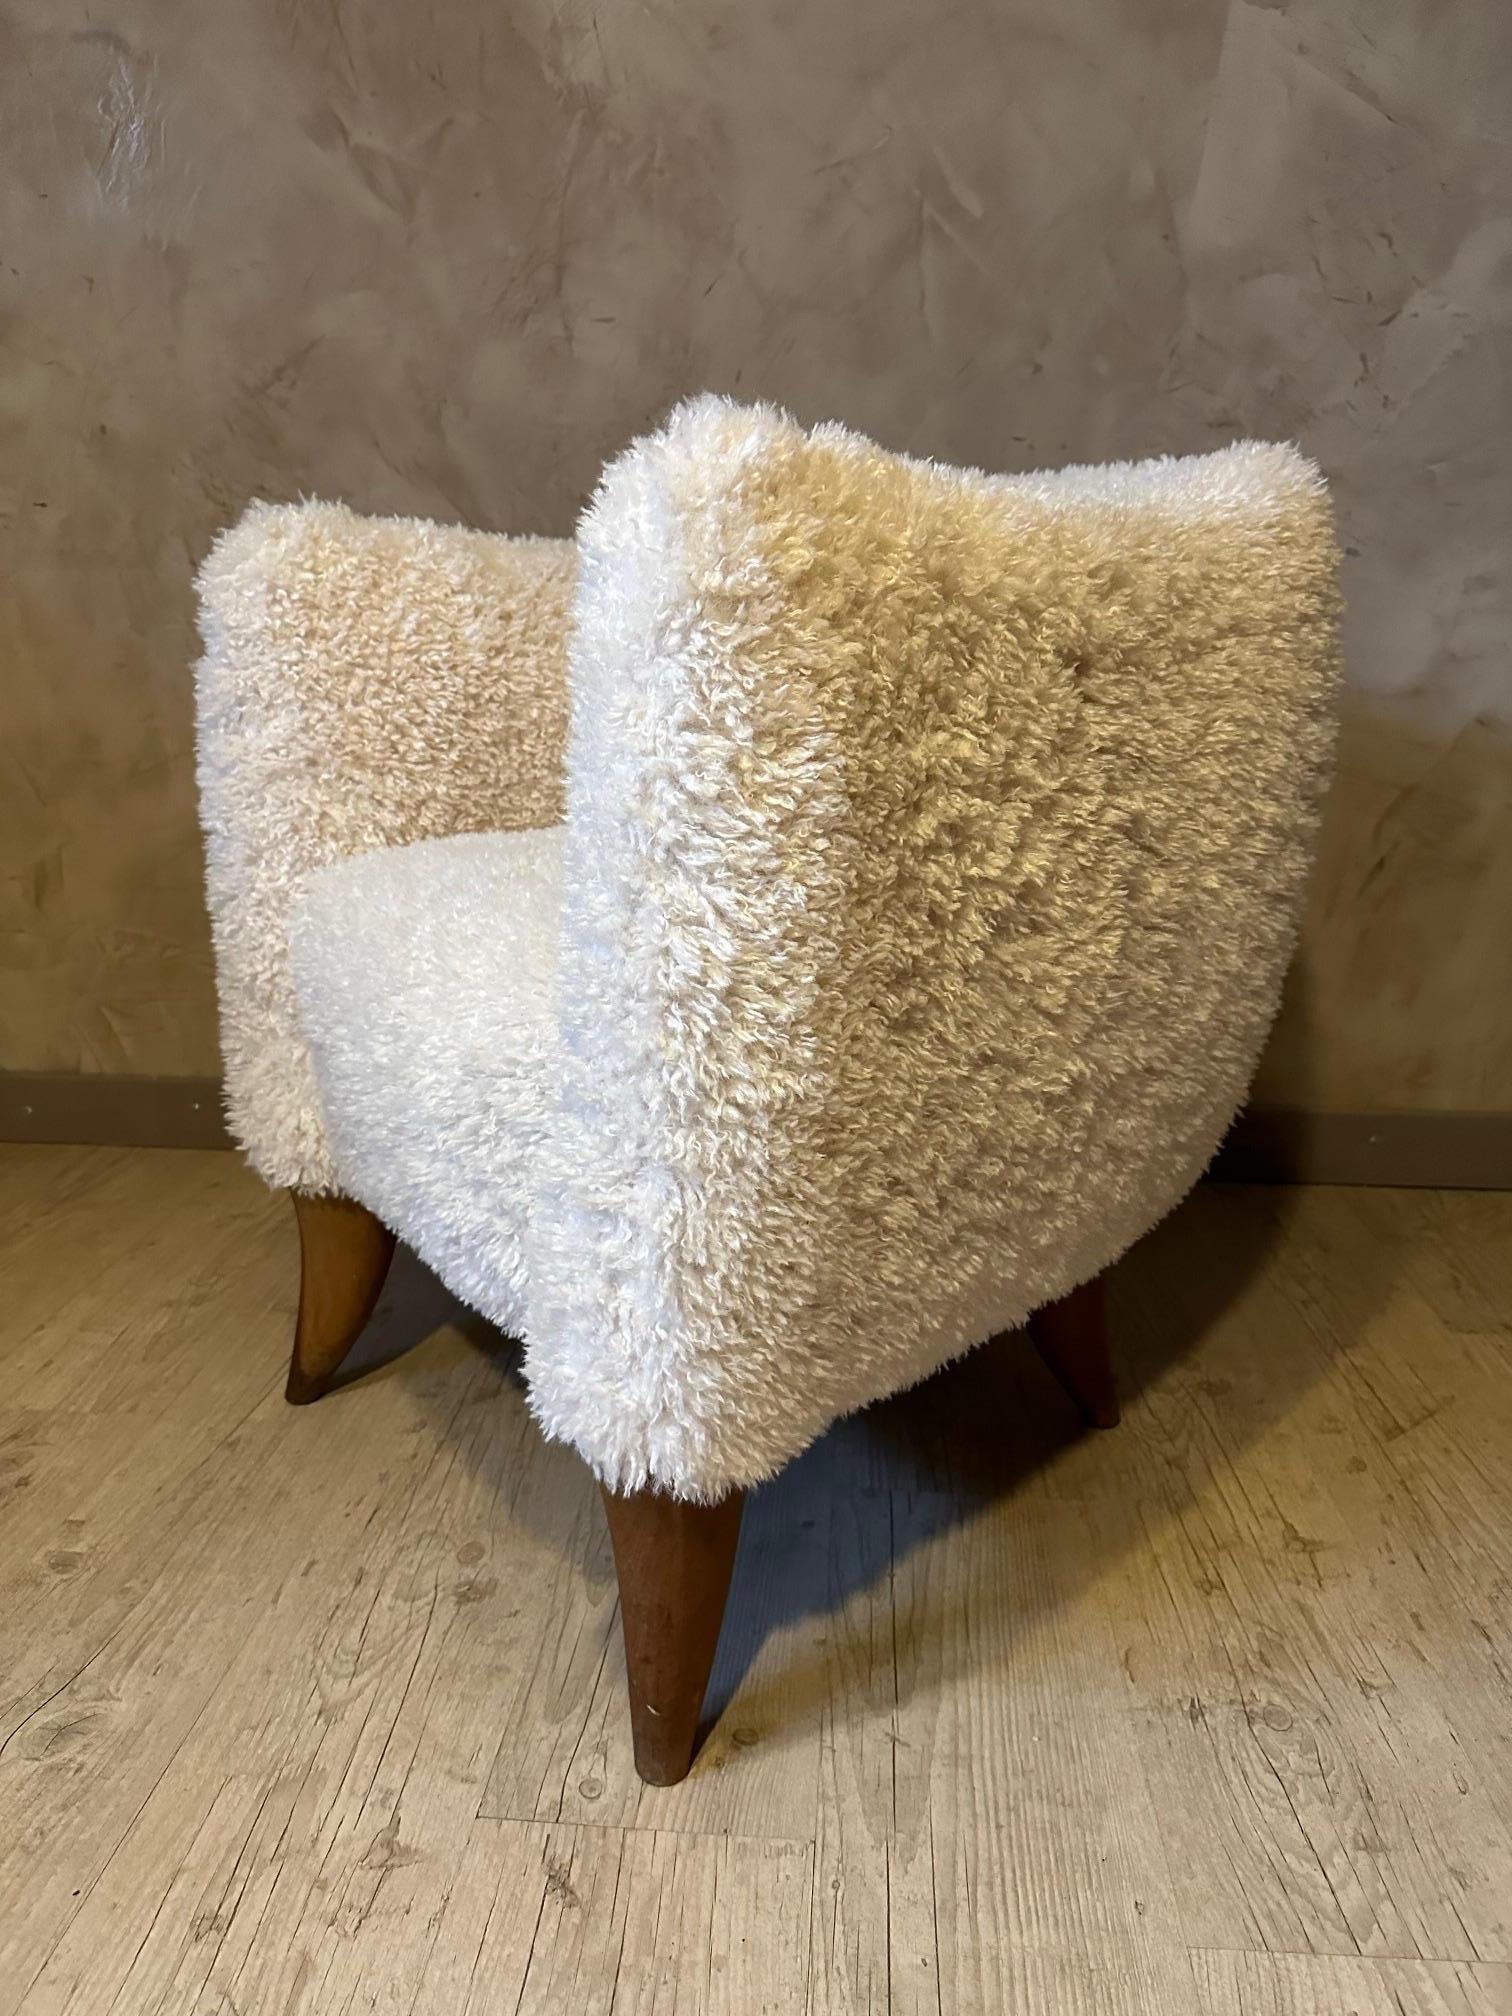 Magnificent armchair from the SWANN brand French house (Maroua model) completely reupholstered by ourselves with a very fluffy fabric, reminiscent of sheep's wool. Very comfortable.
Solid beech base in the shape of horns. This armchair was designed